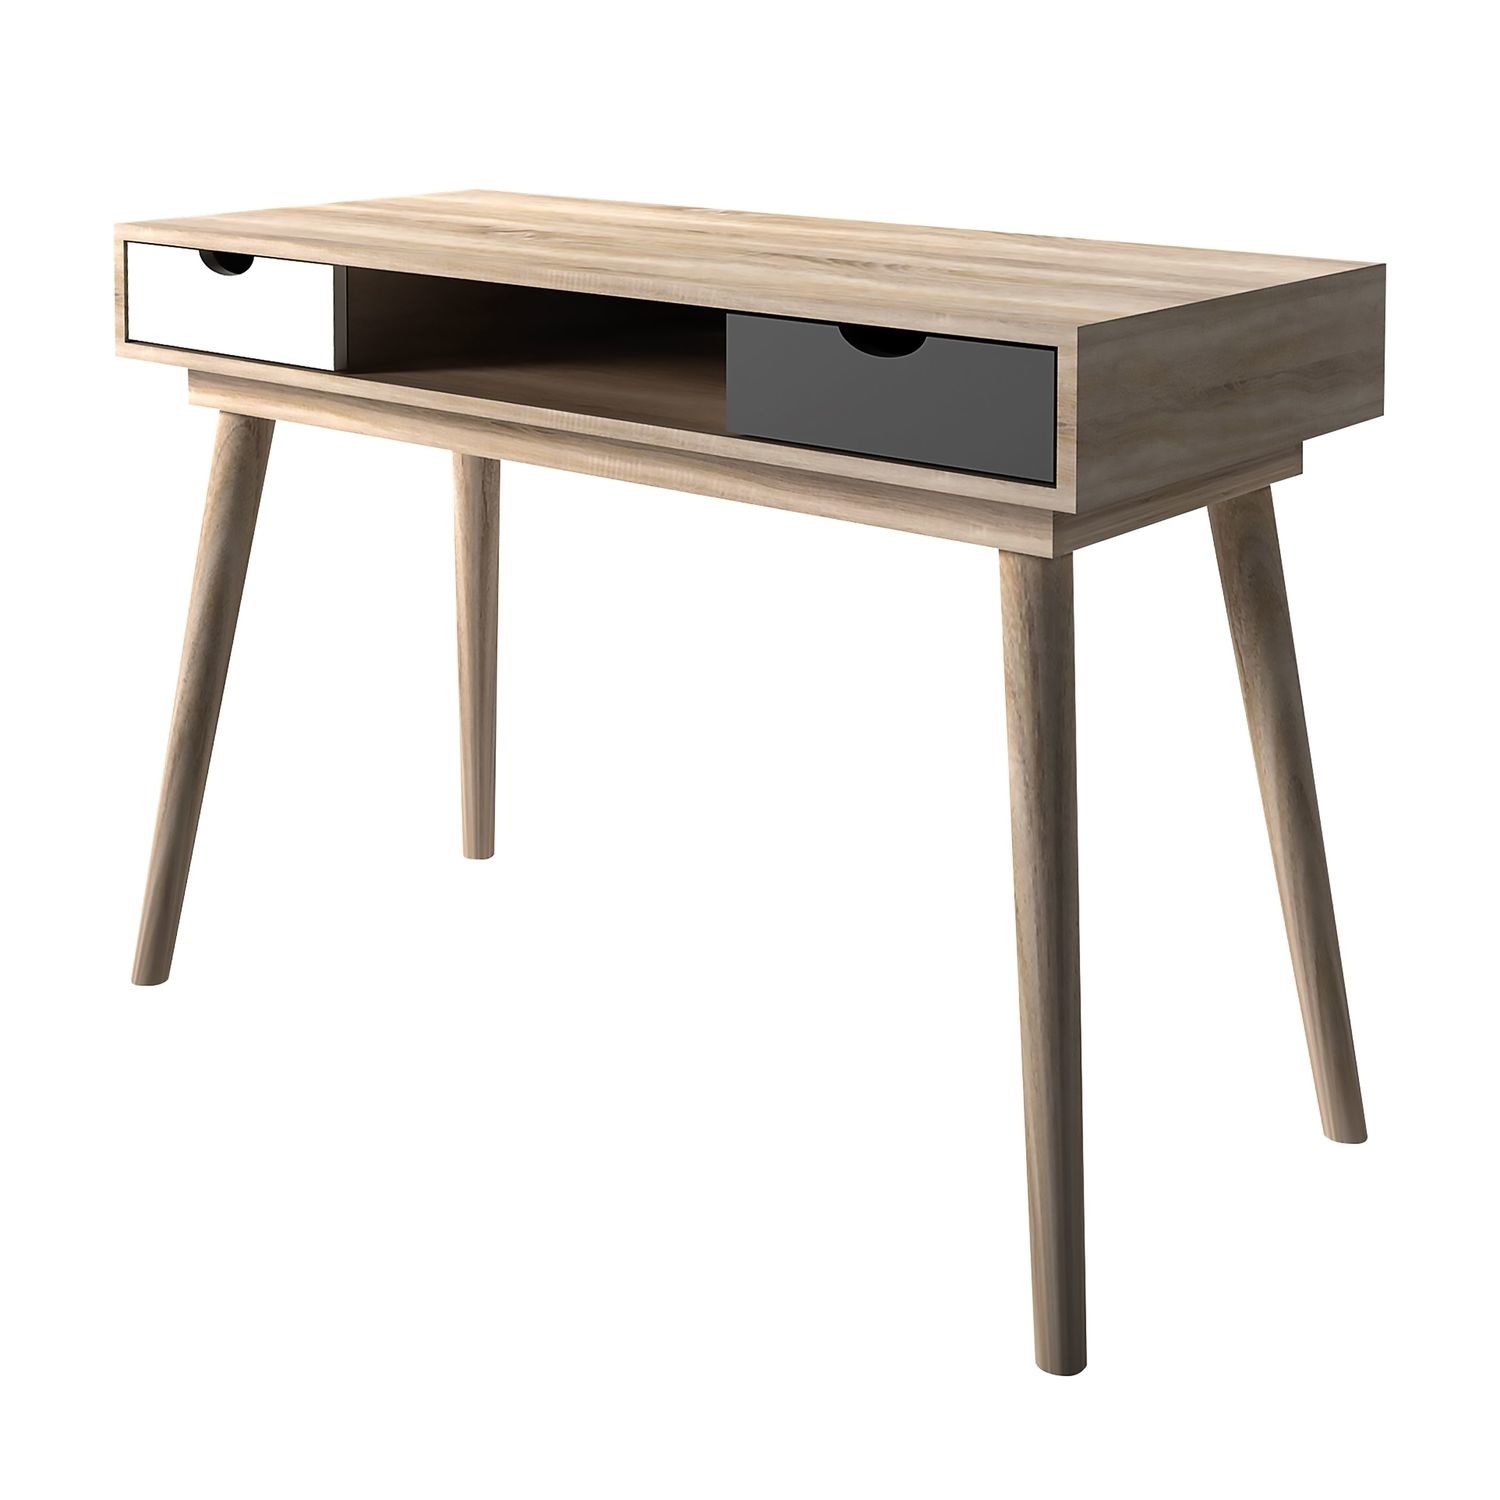 Read more about Small oak effect office desk with drawers